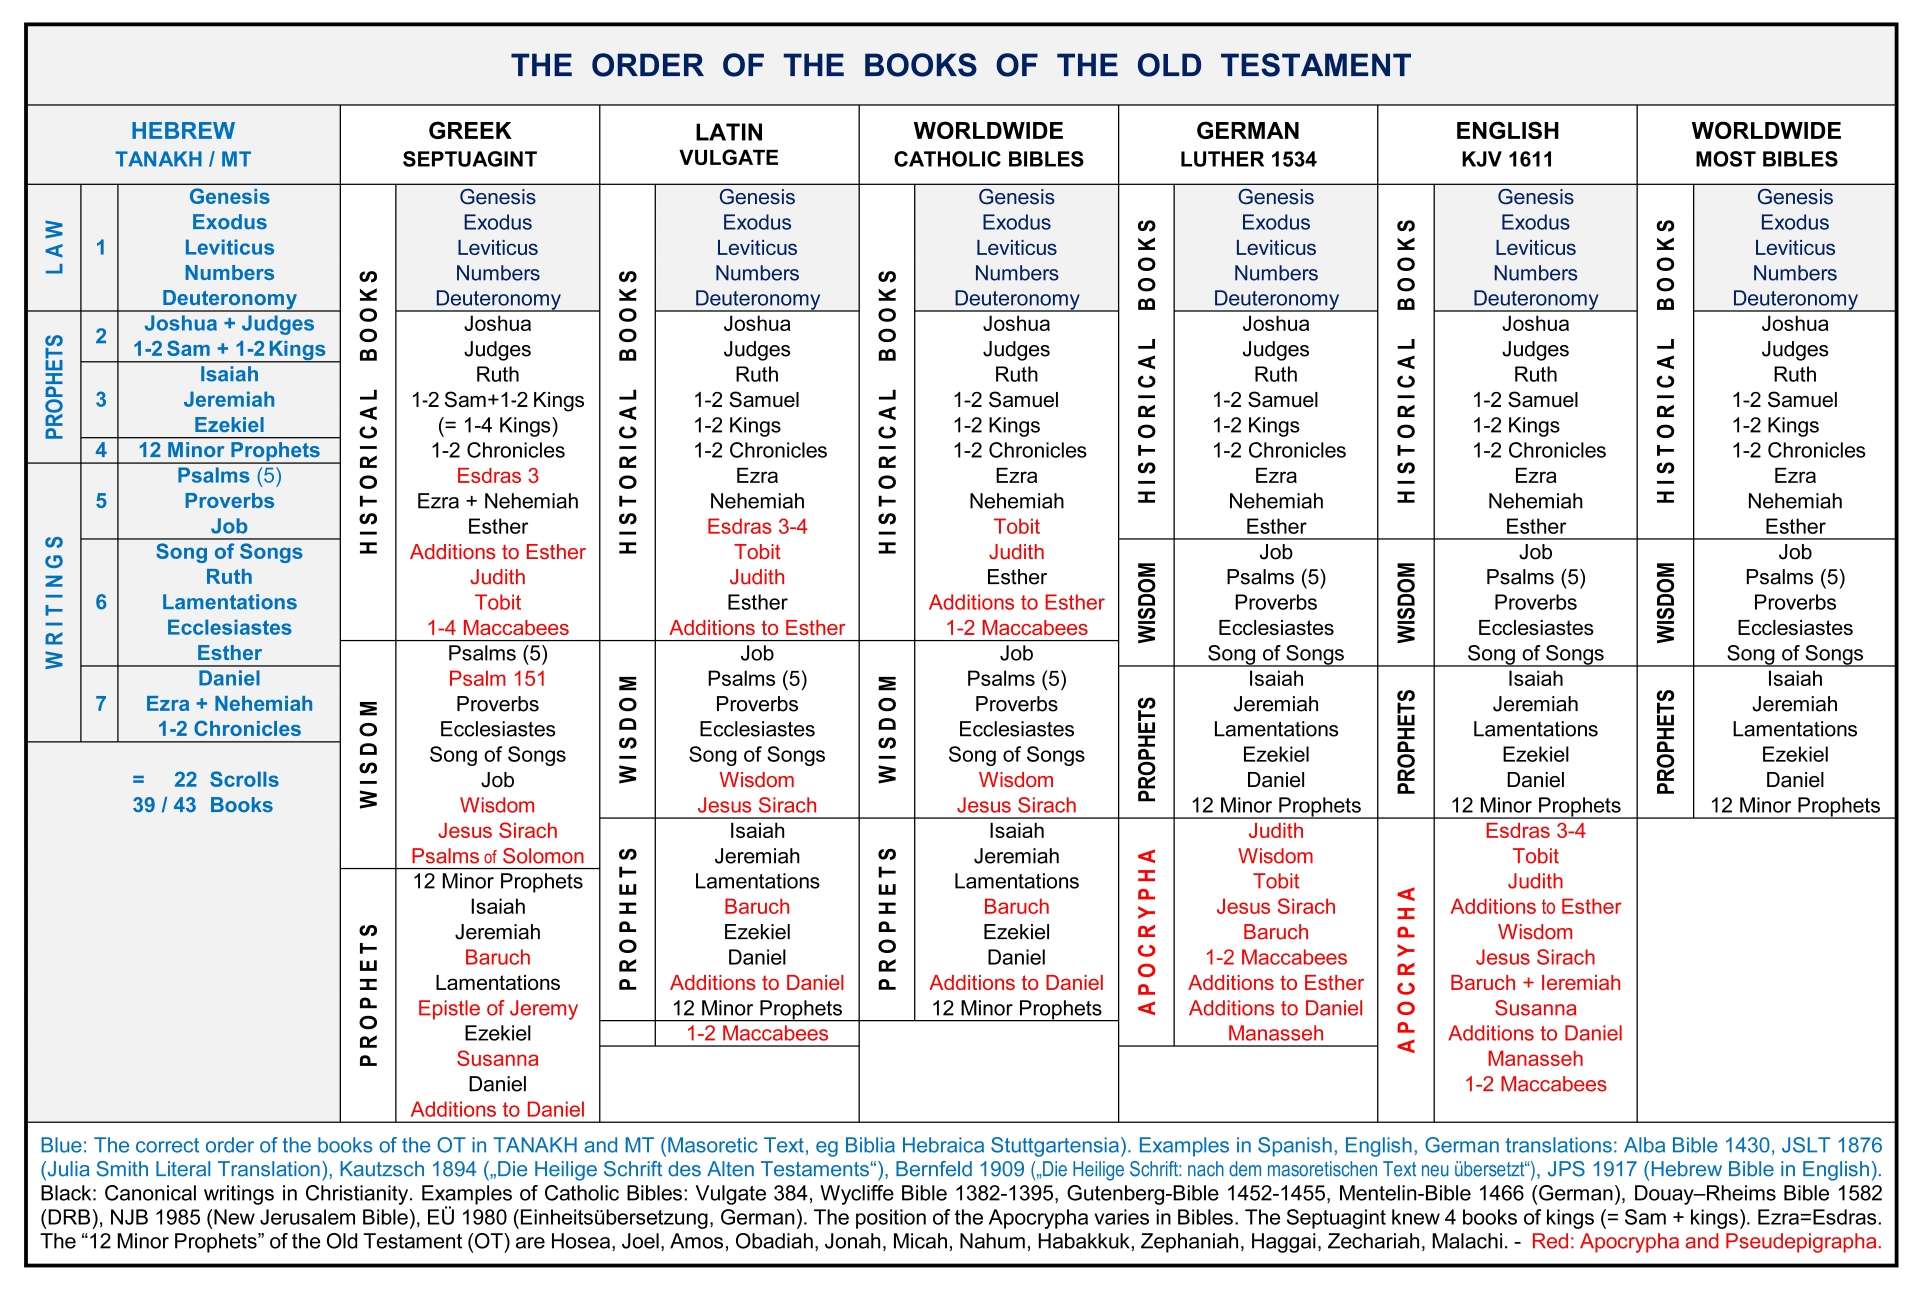 THE ORDER OF THE BOOKS OF THE BIBLE